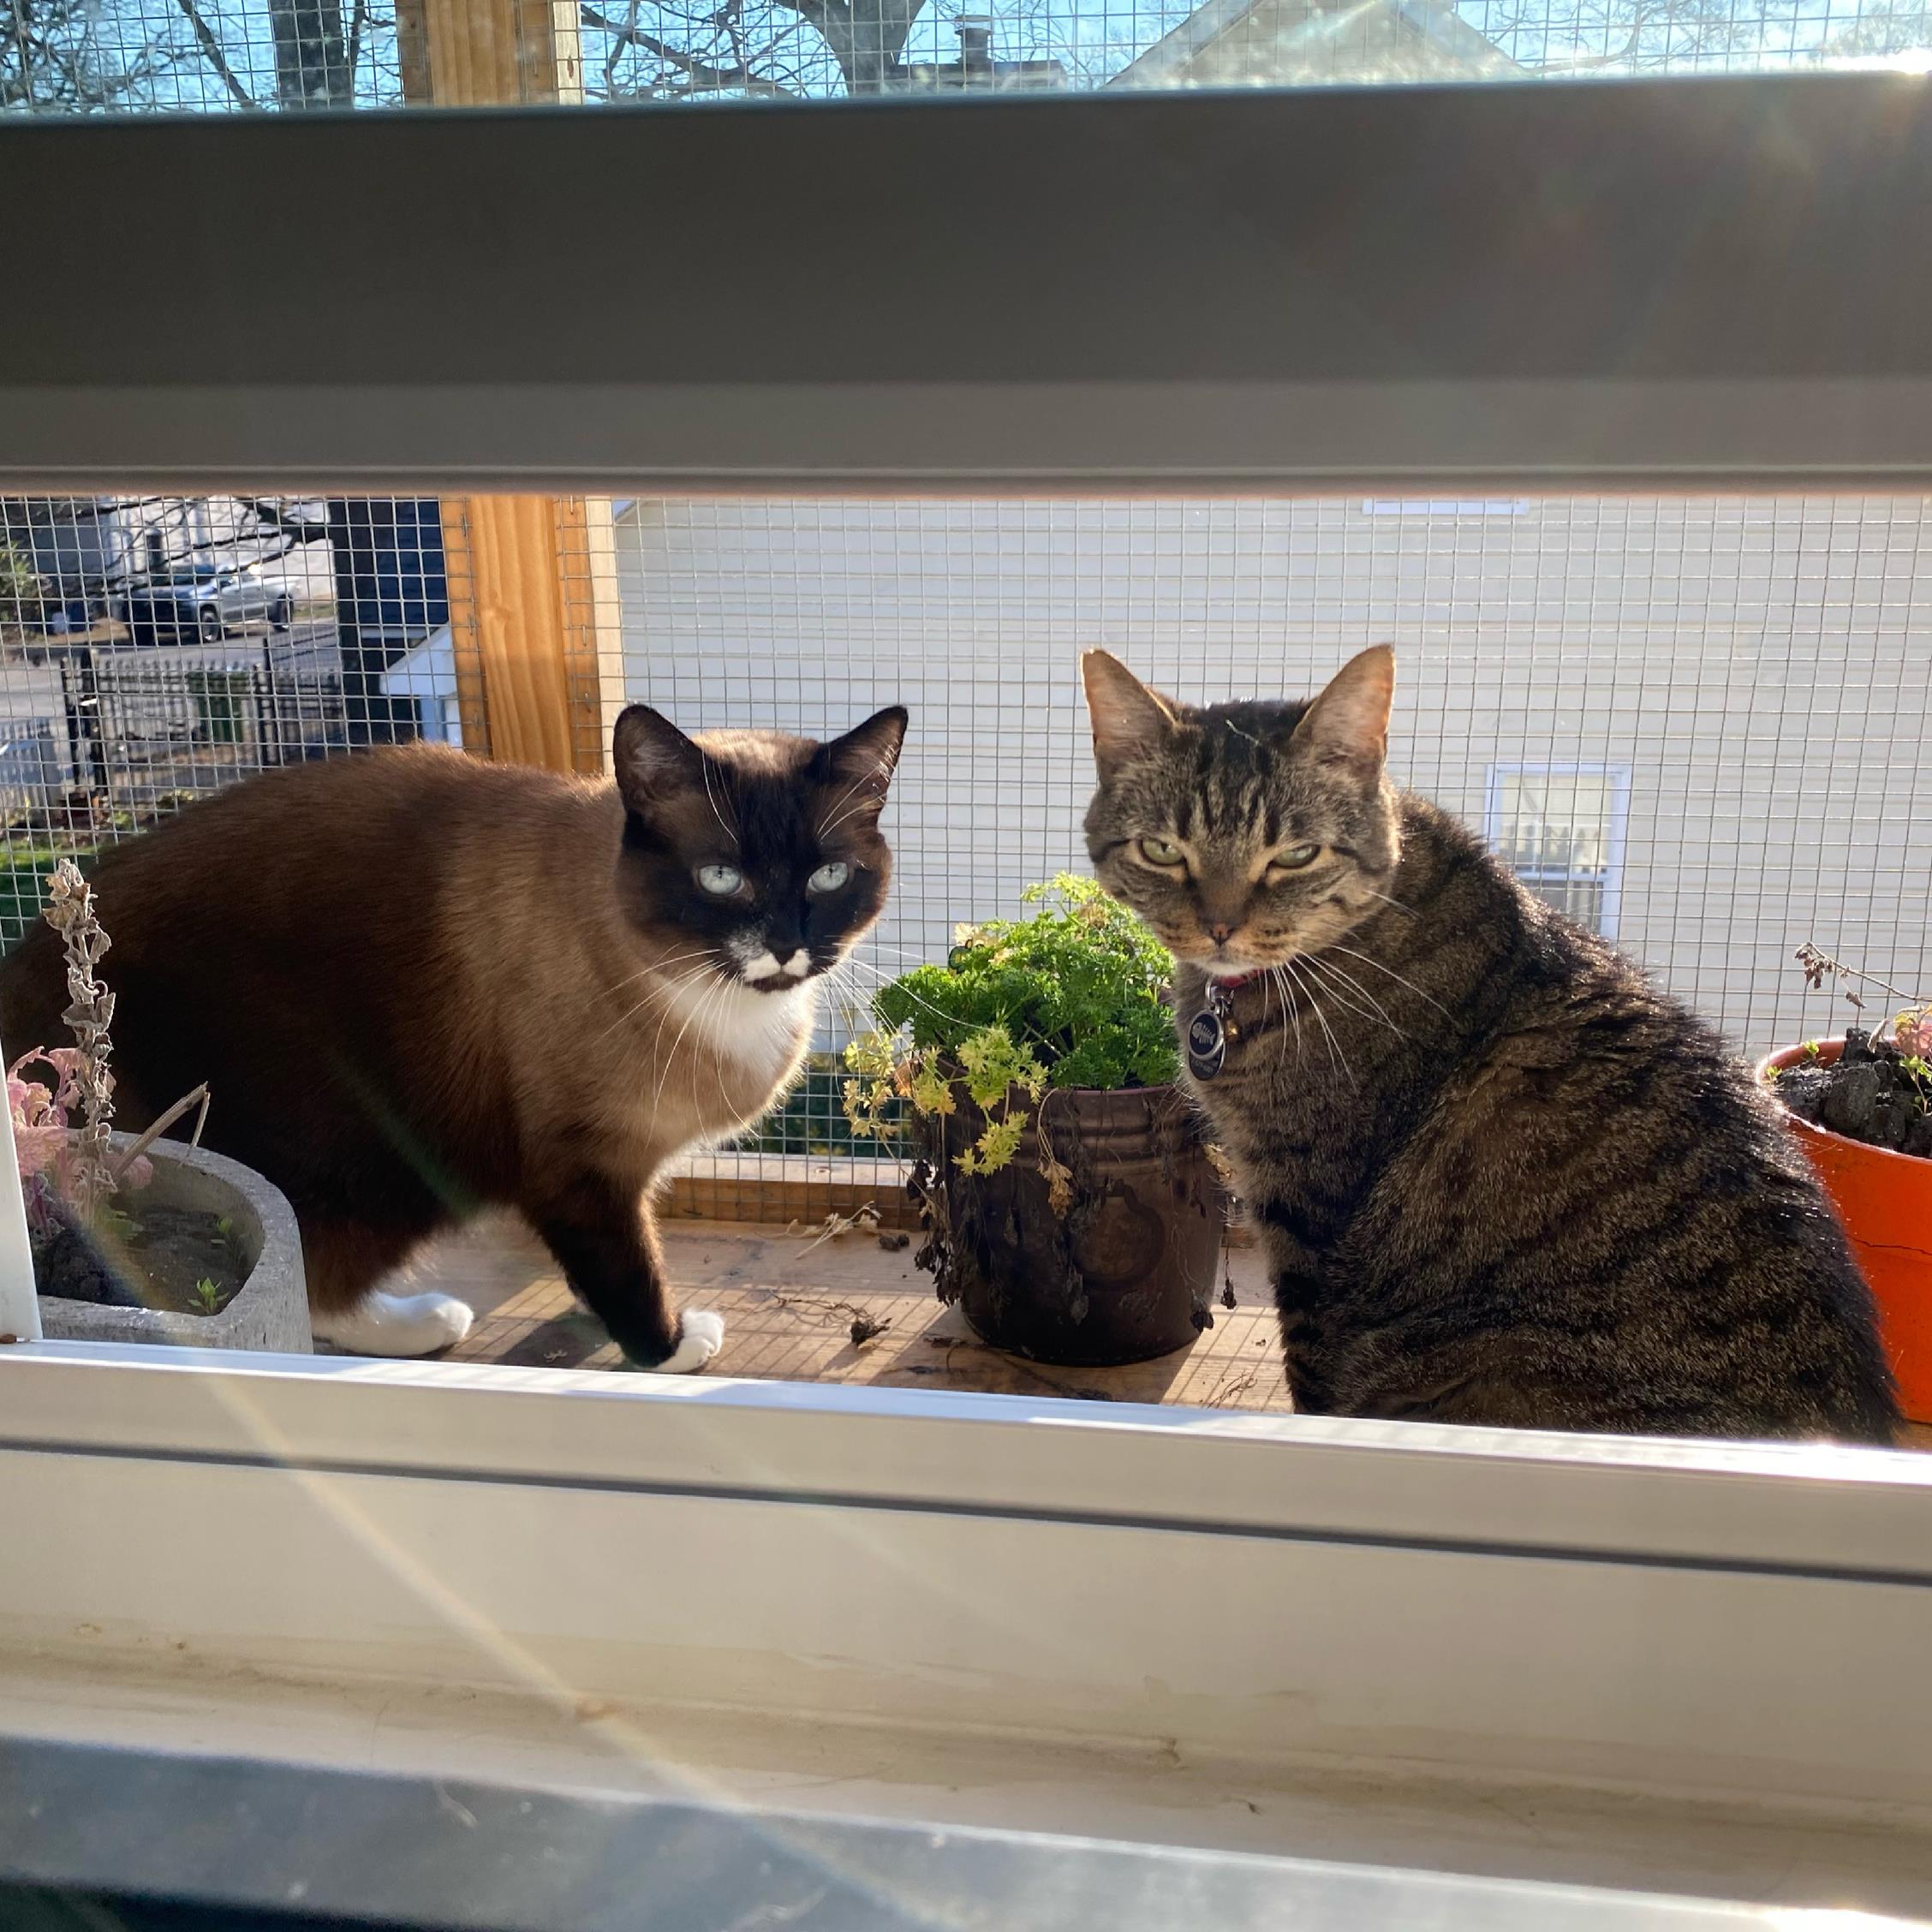 She shared her personal catio with her friends!